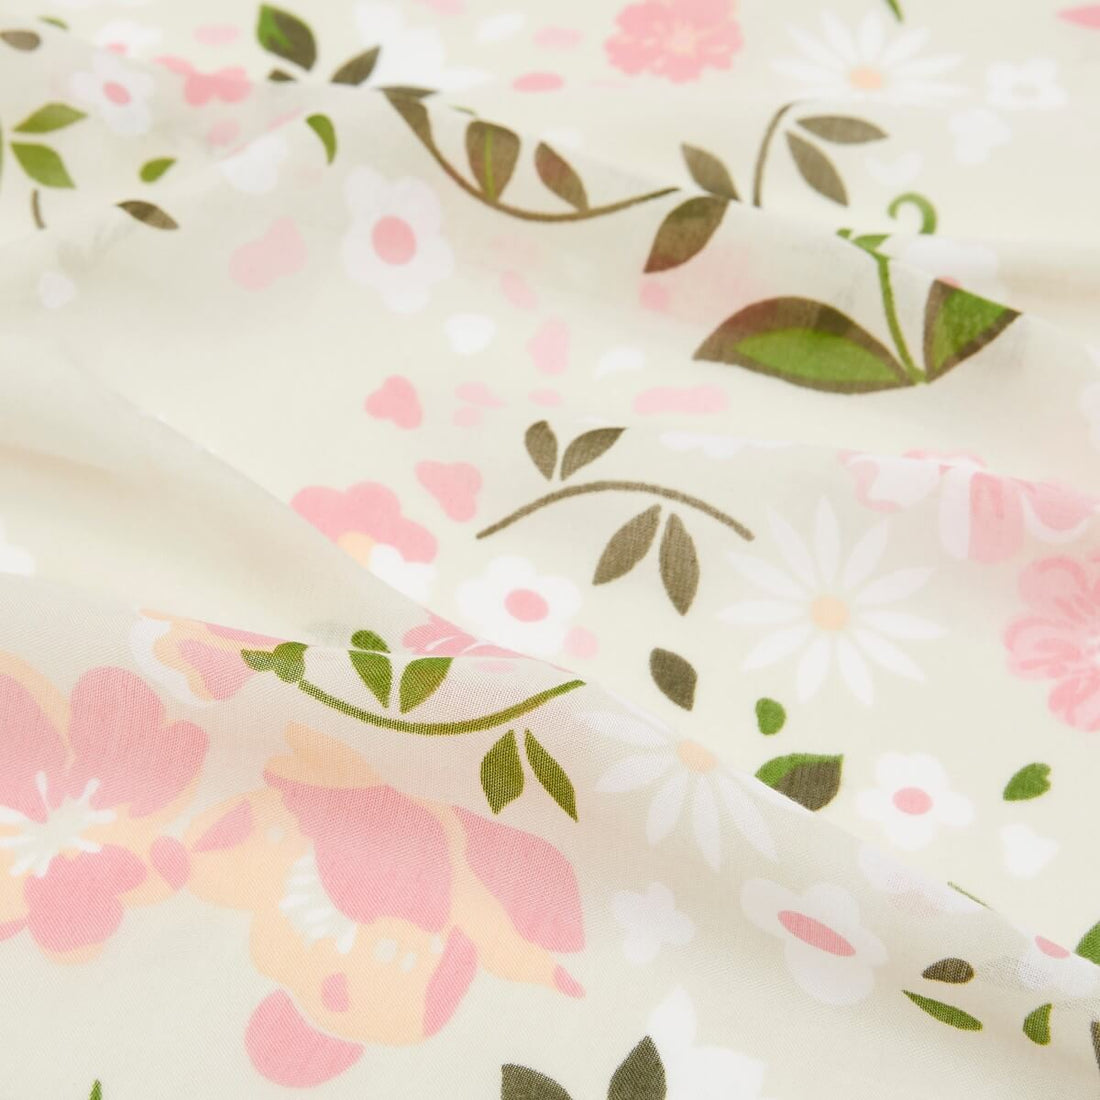 Floral Print Scarf Pink And White Flower